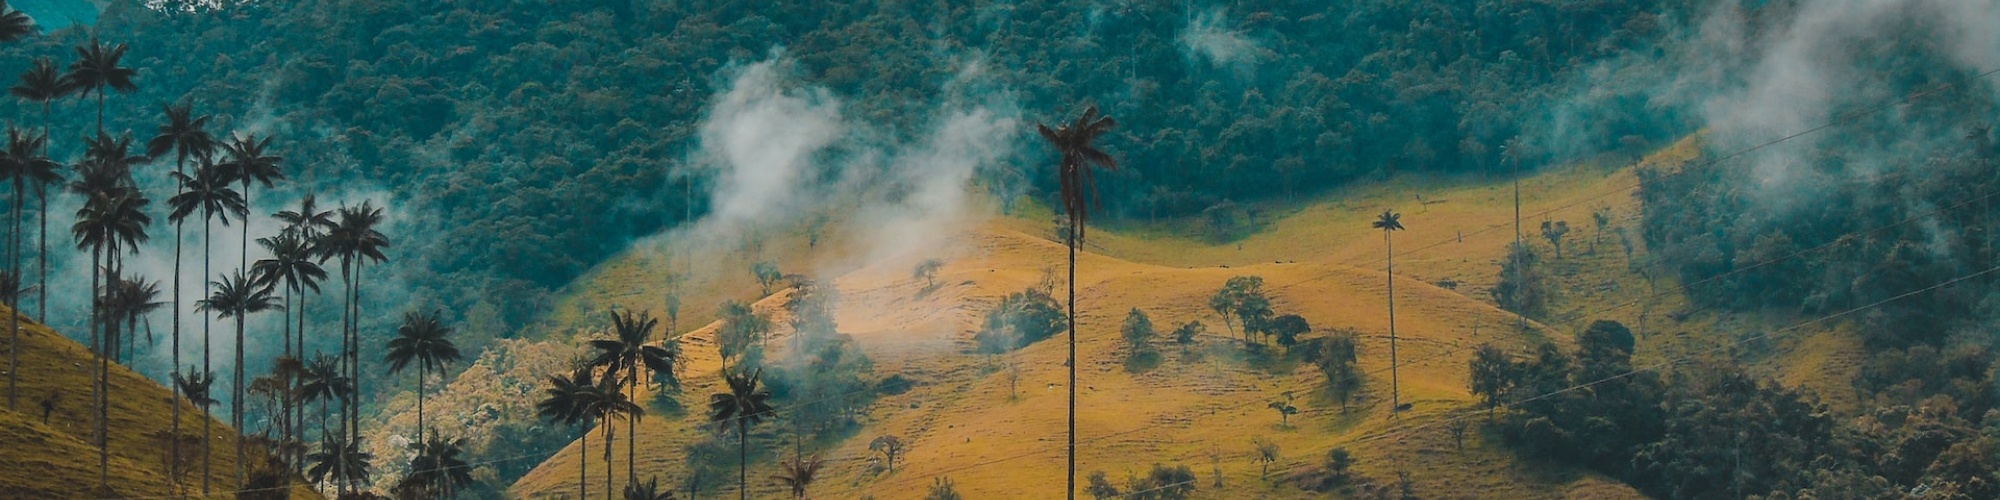 Photo of a patchy grass and forest-covered hillside in Cocora Valley, Colombia by Fernanda Fierro.